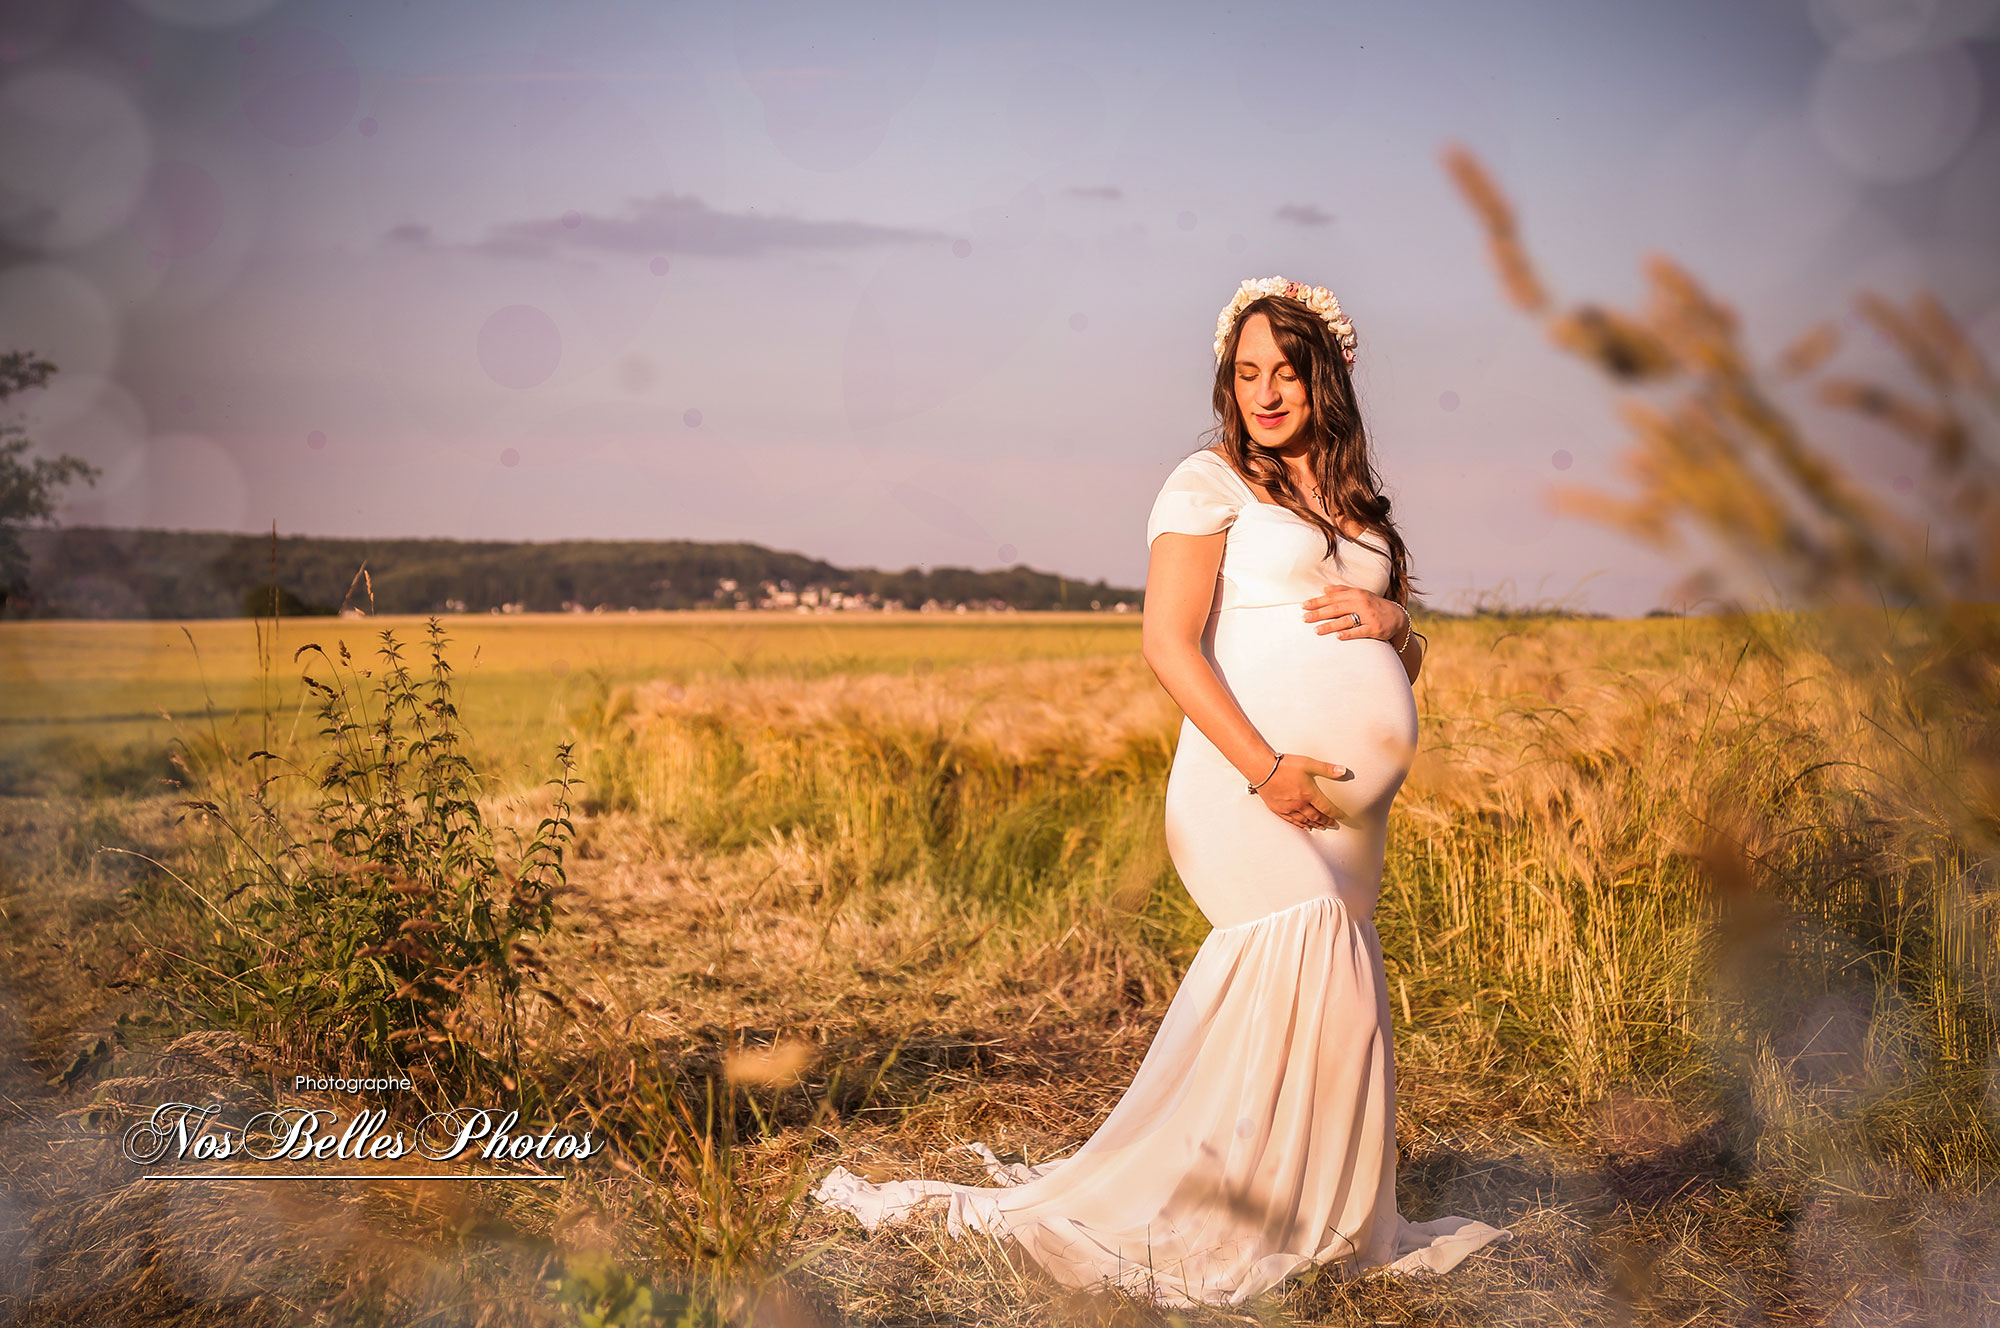 Photographe grossesse Le Chesnay-Rocquencourt Yvelines, shooting photo grossesse, future maman, femme enceinte en extérieur Le Chesnay-Rocquencourt